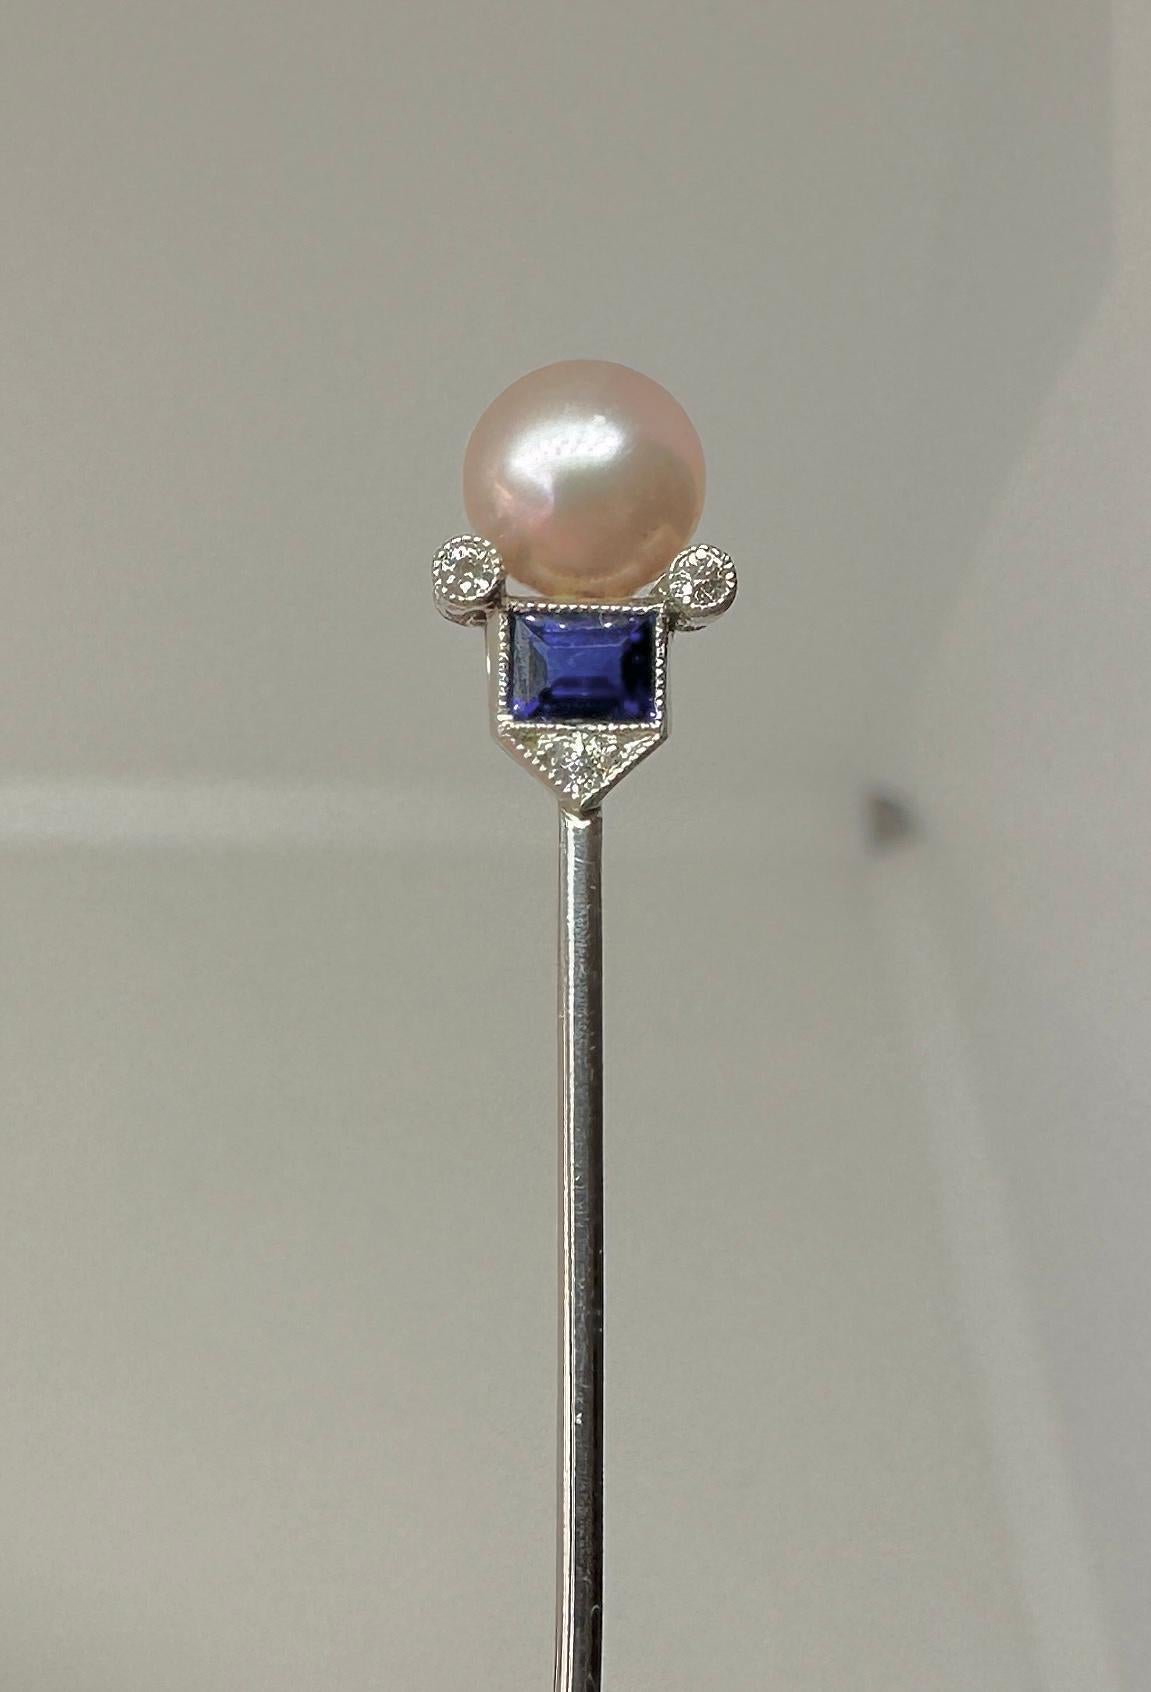 Tiffany & Co. Art Deco Sapphire Pearl Diamond Platinum Stick Pin Brooch, 1900 In Excellent Condition For Sale In New York, NY